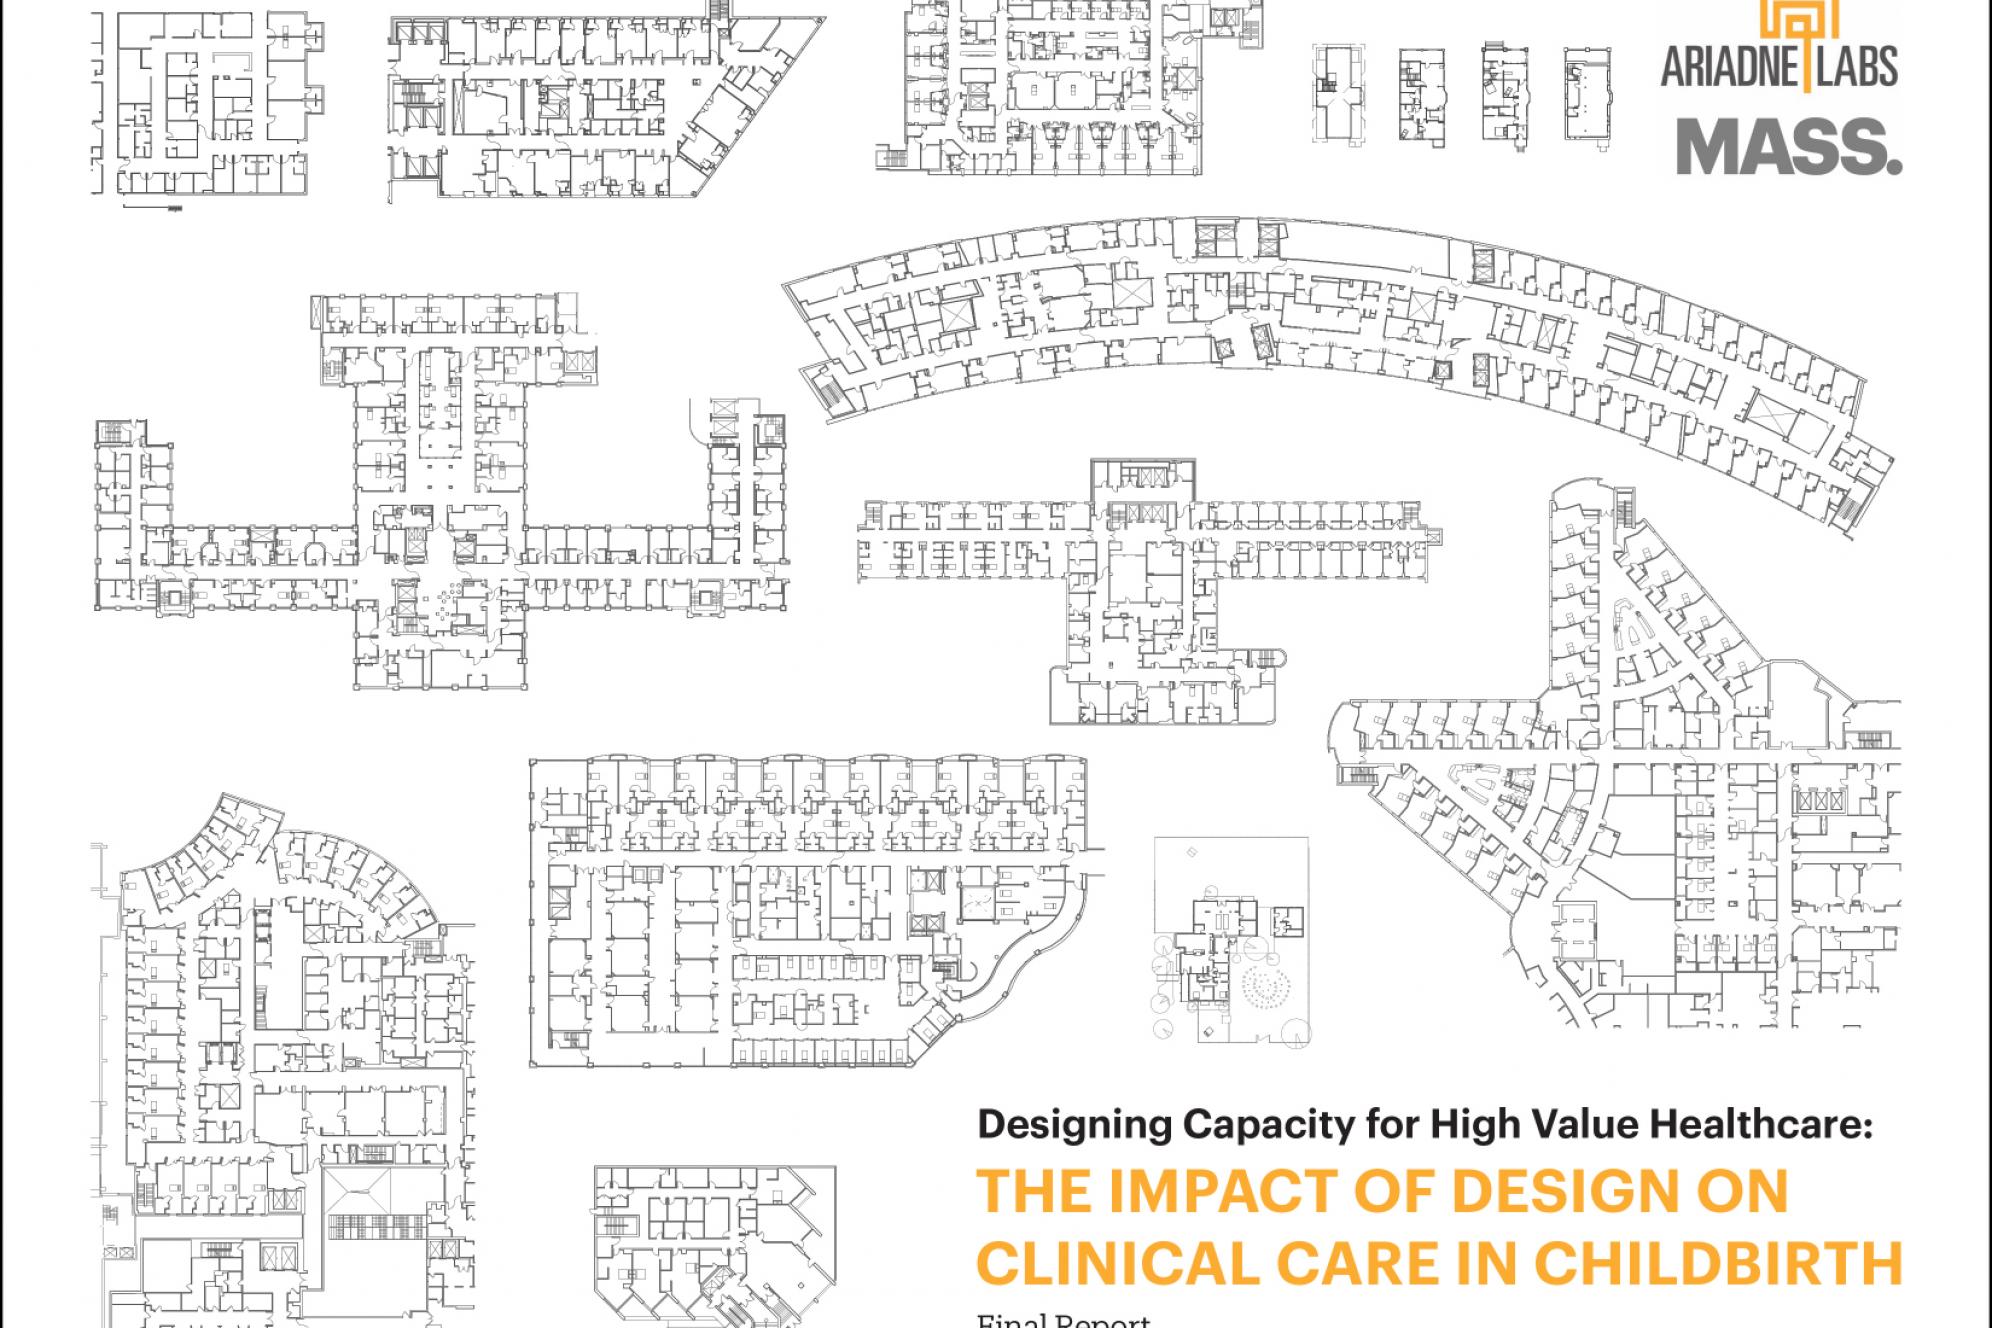 "Designing Capacity for High-Value Healthcare" Report Download